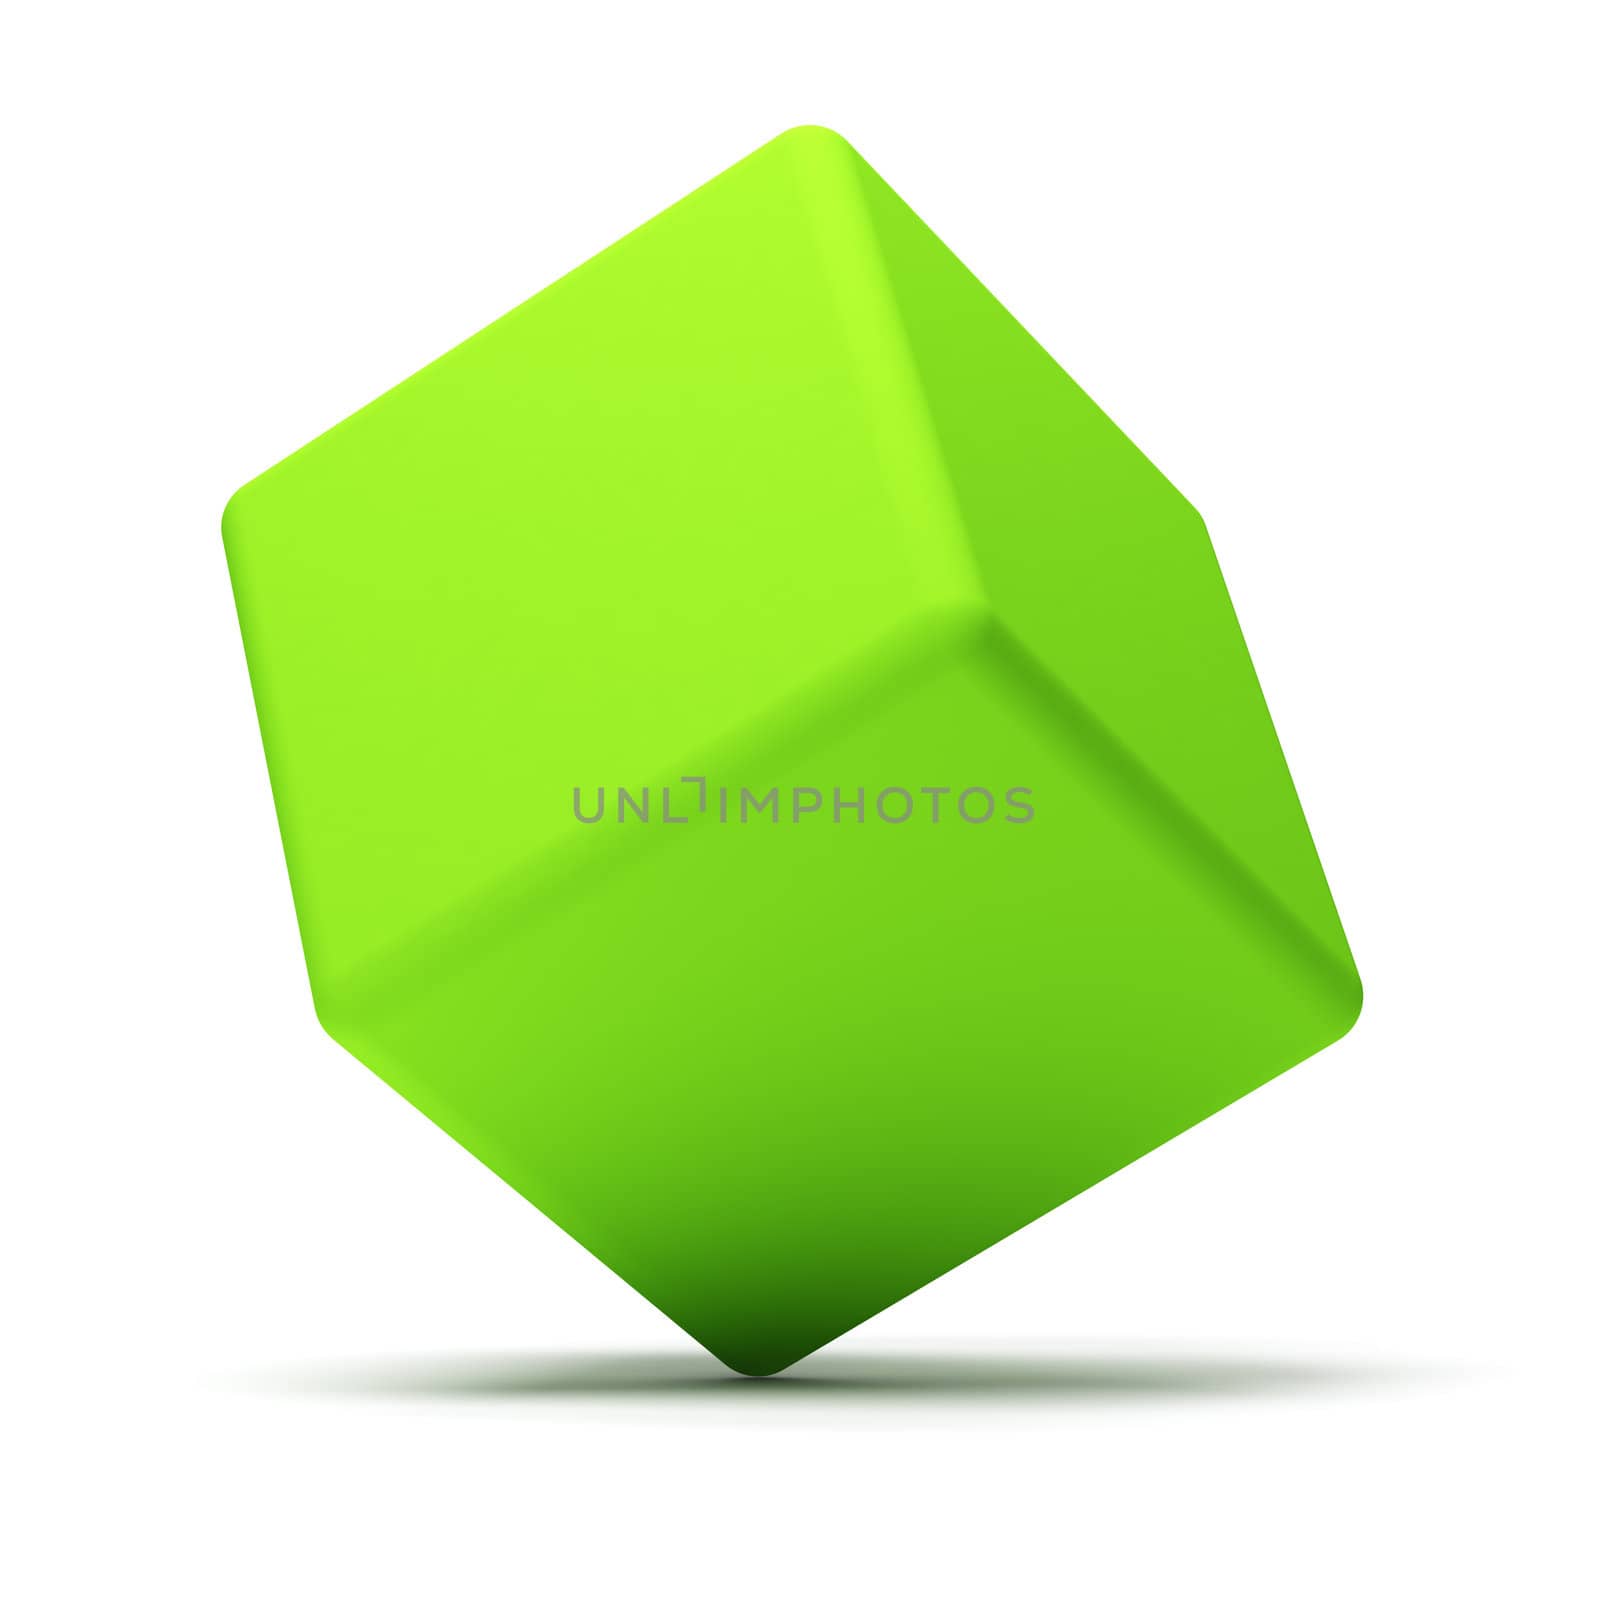 Cube Isolated on White